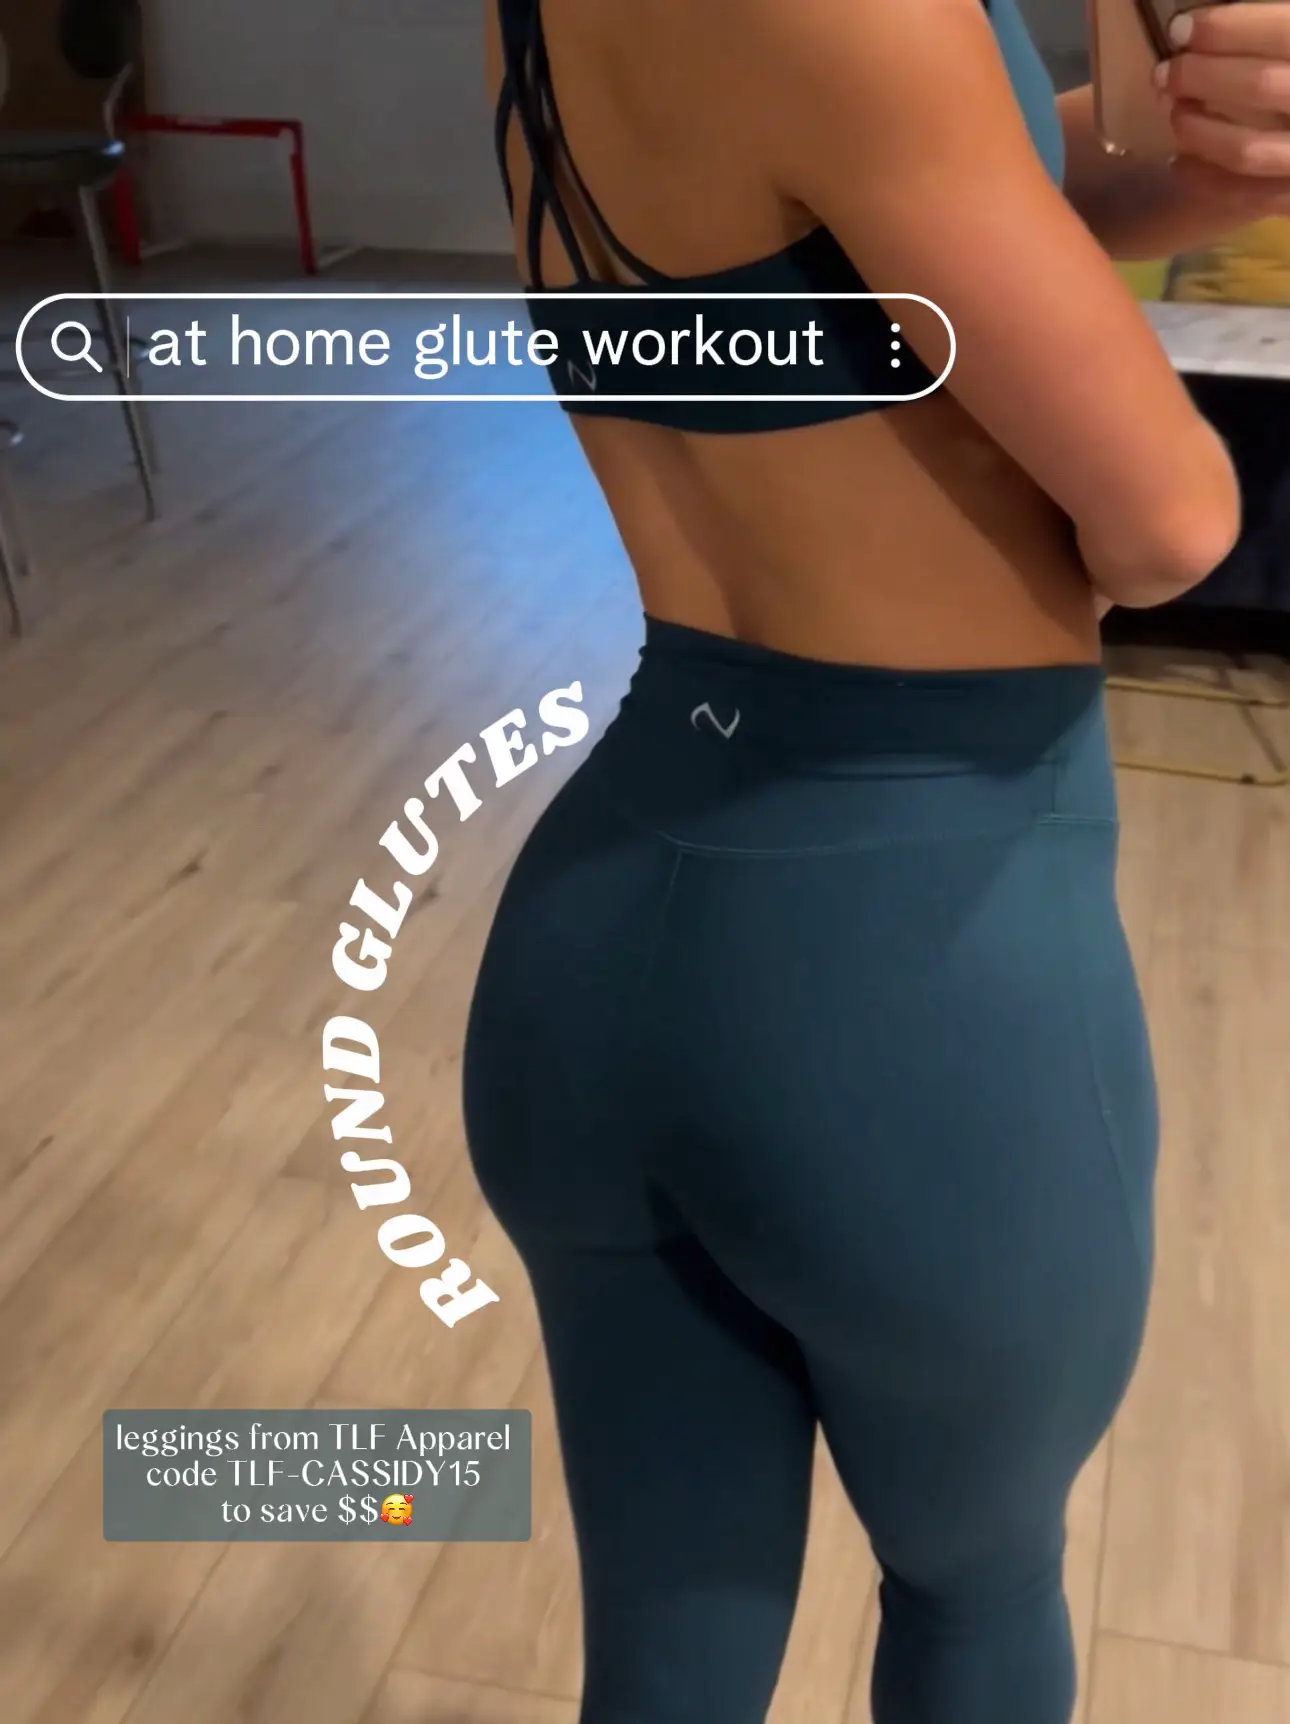 NO GYM? GET MASSIVE GLUTE GAINS AT🏠Dumbbell Only, Gallery posted by  Cassidy